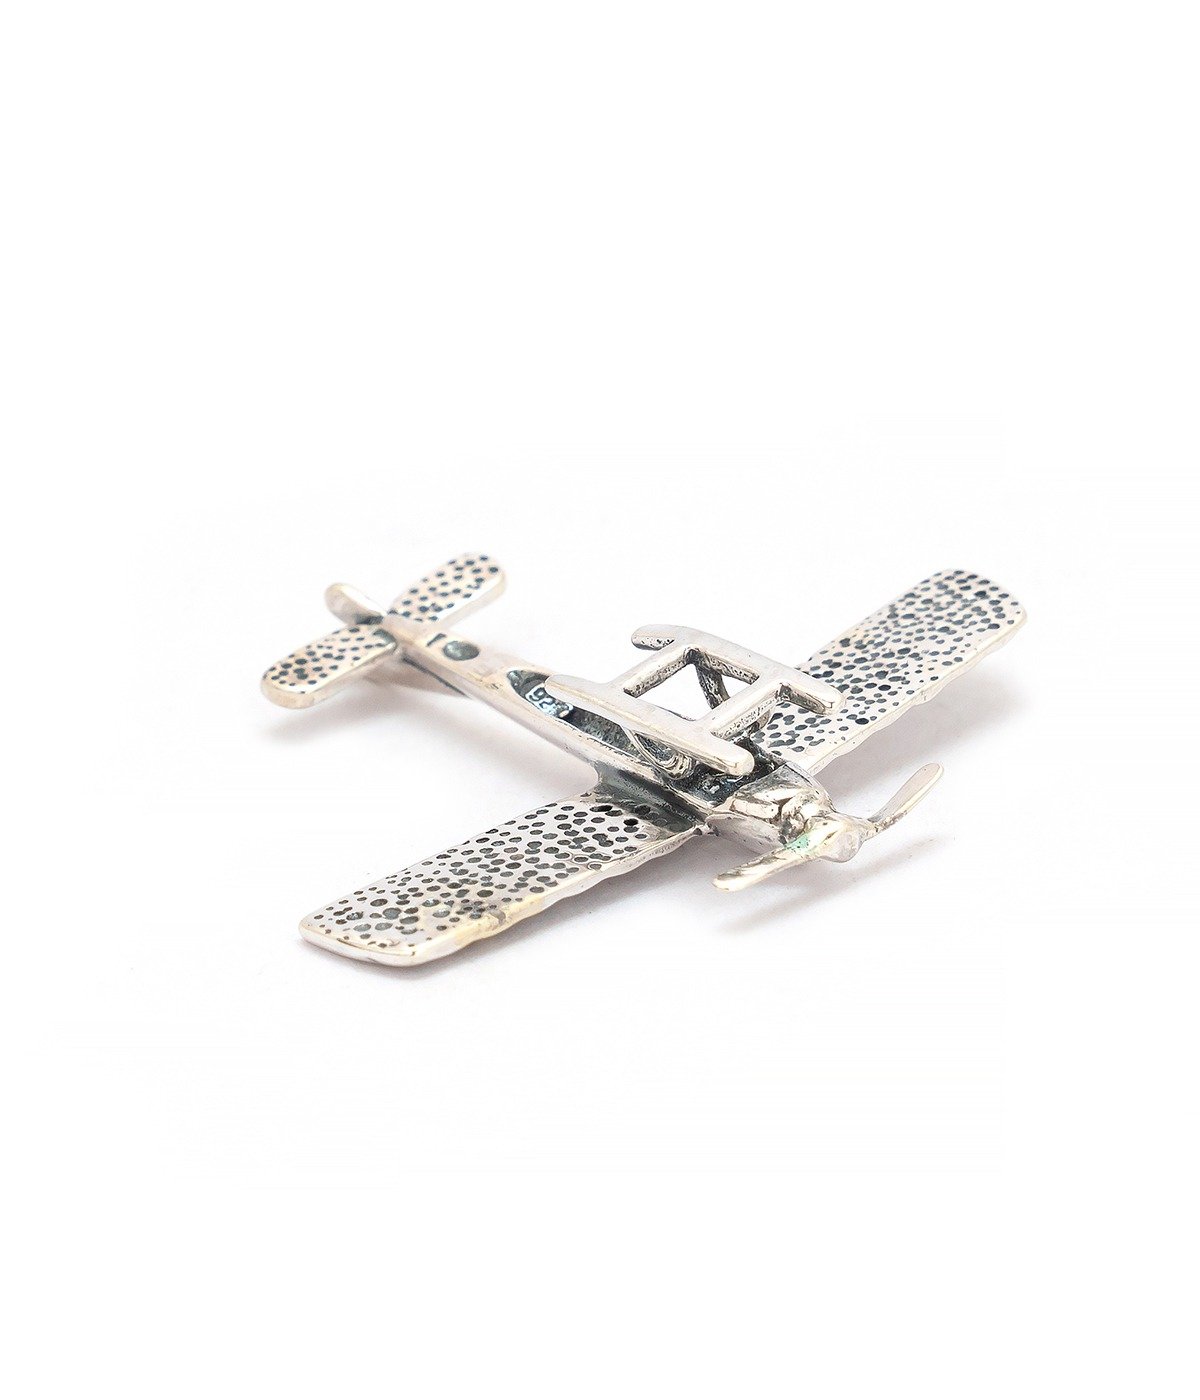 92.5 STERLING SILVER  MINIATURE AEROPLANE FOR GIFT